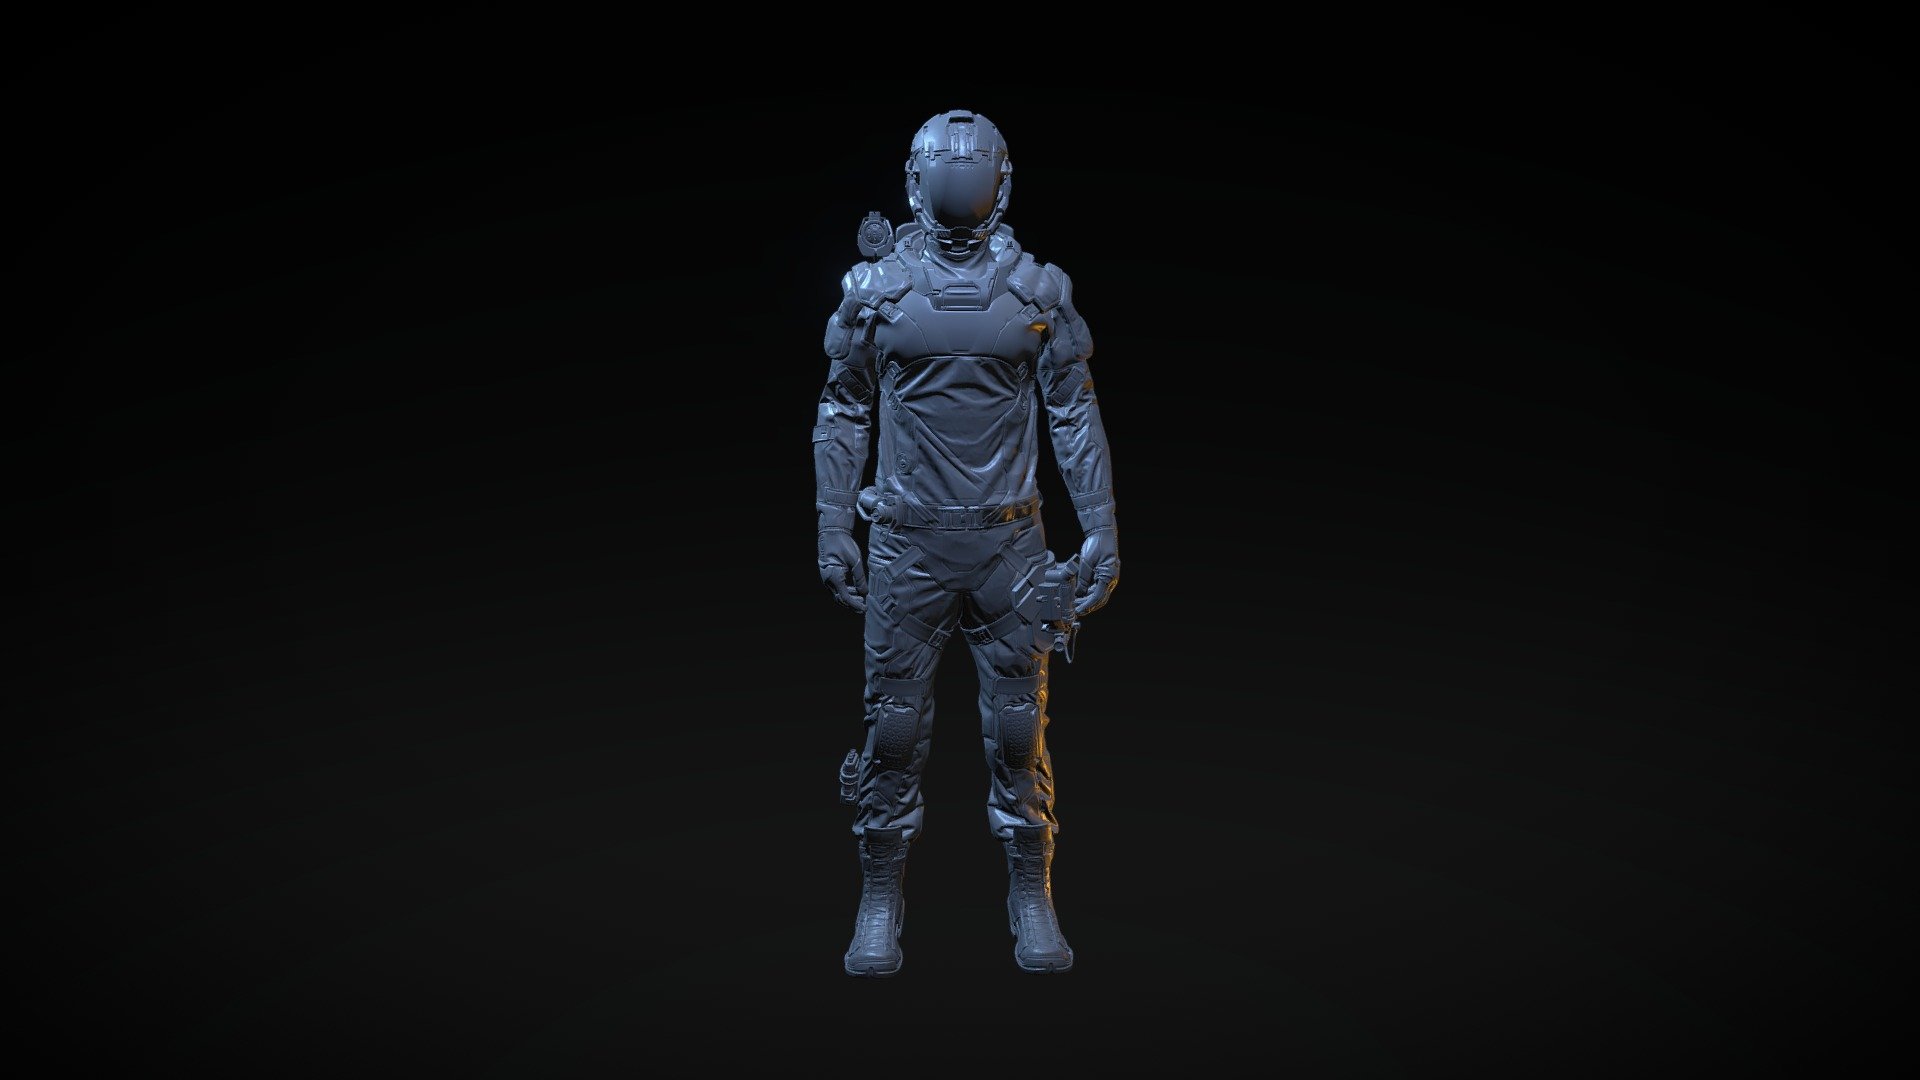 Col. Rigel (Lightweight EVA suit)

Built and designed in Marvelous designer and 3DS Max. My first time using Corona Render too!

Designed for Luke Ployhar - Col. Rigel - 3D model by mxnarch 3d model